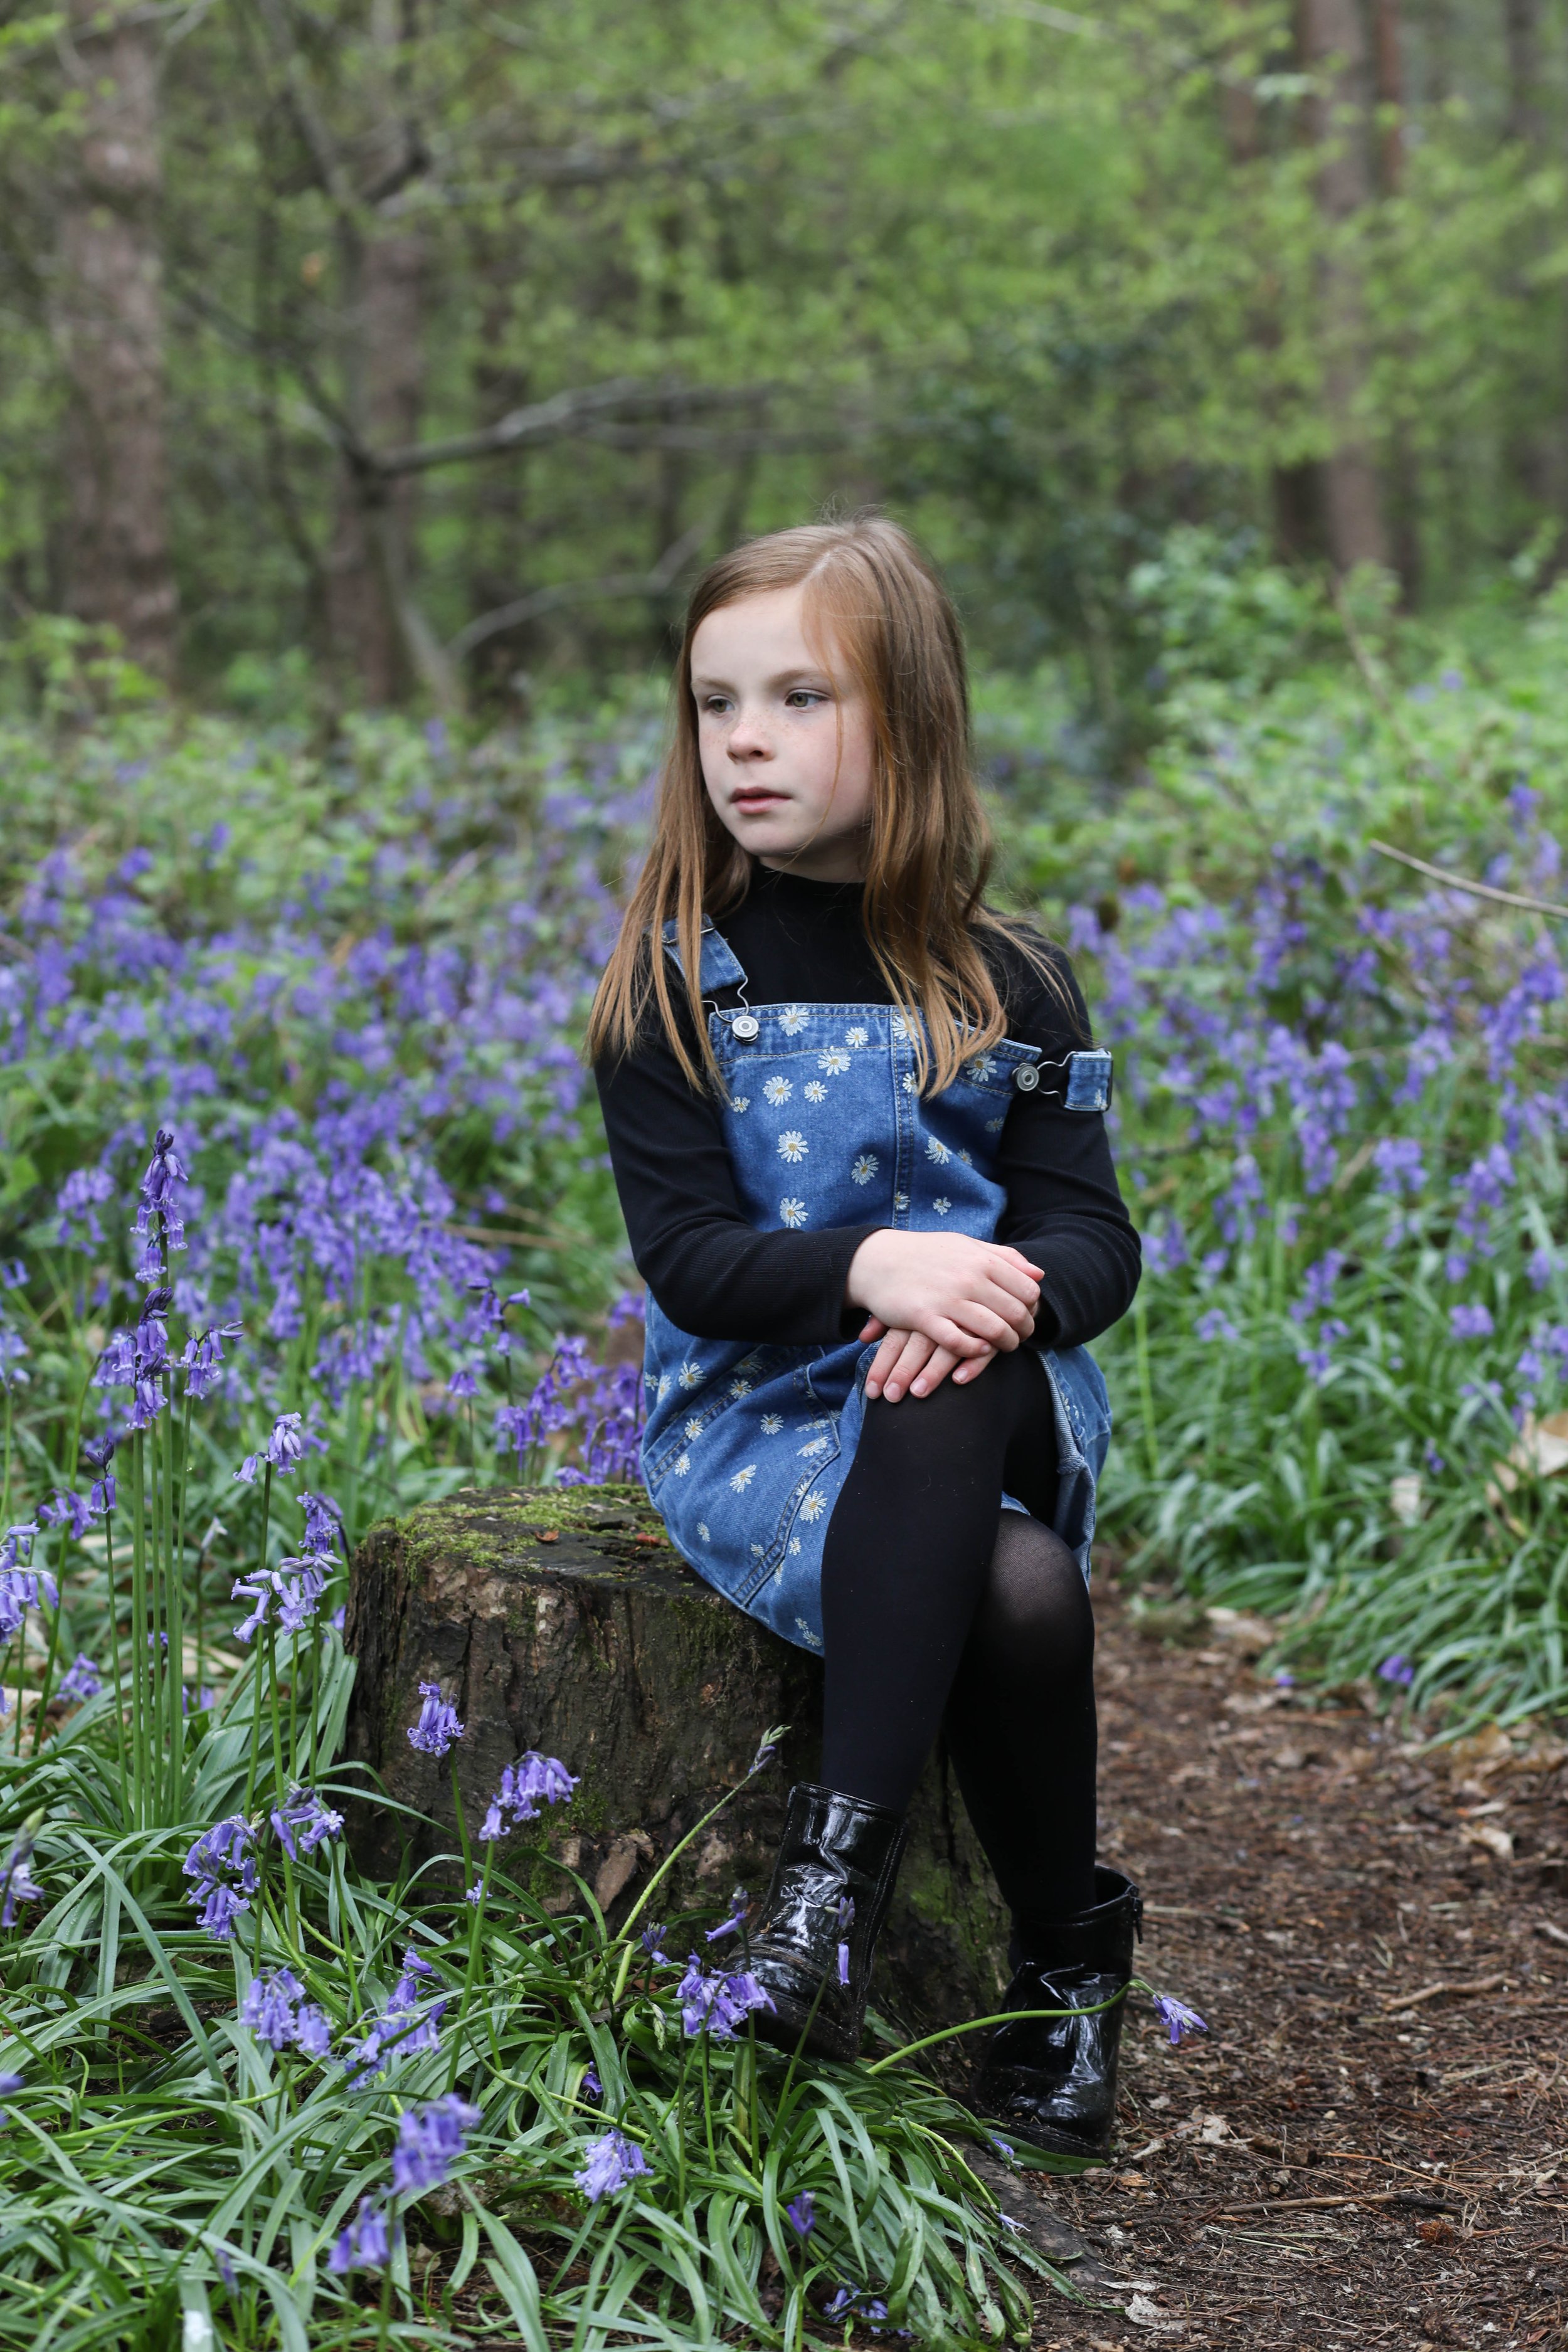 MUM AND DAUGHTER PHOTO SHOOT IN THE BLUEBELLS | BERKSHIRE PORTRAIT SHOOTS40 choice .JPG